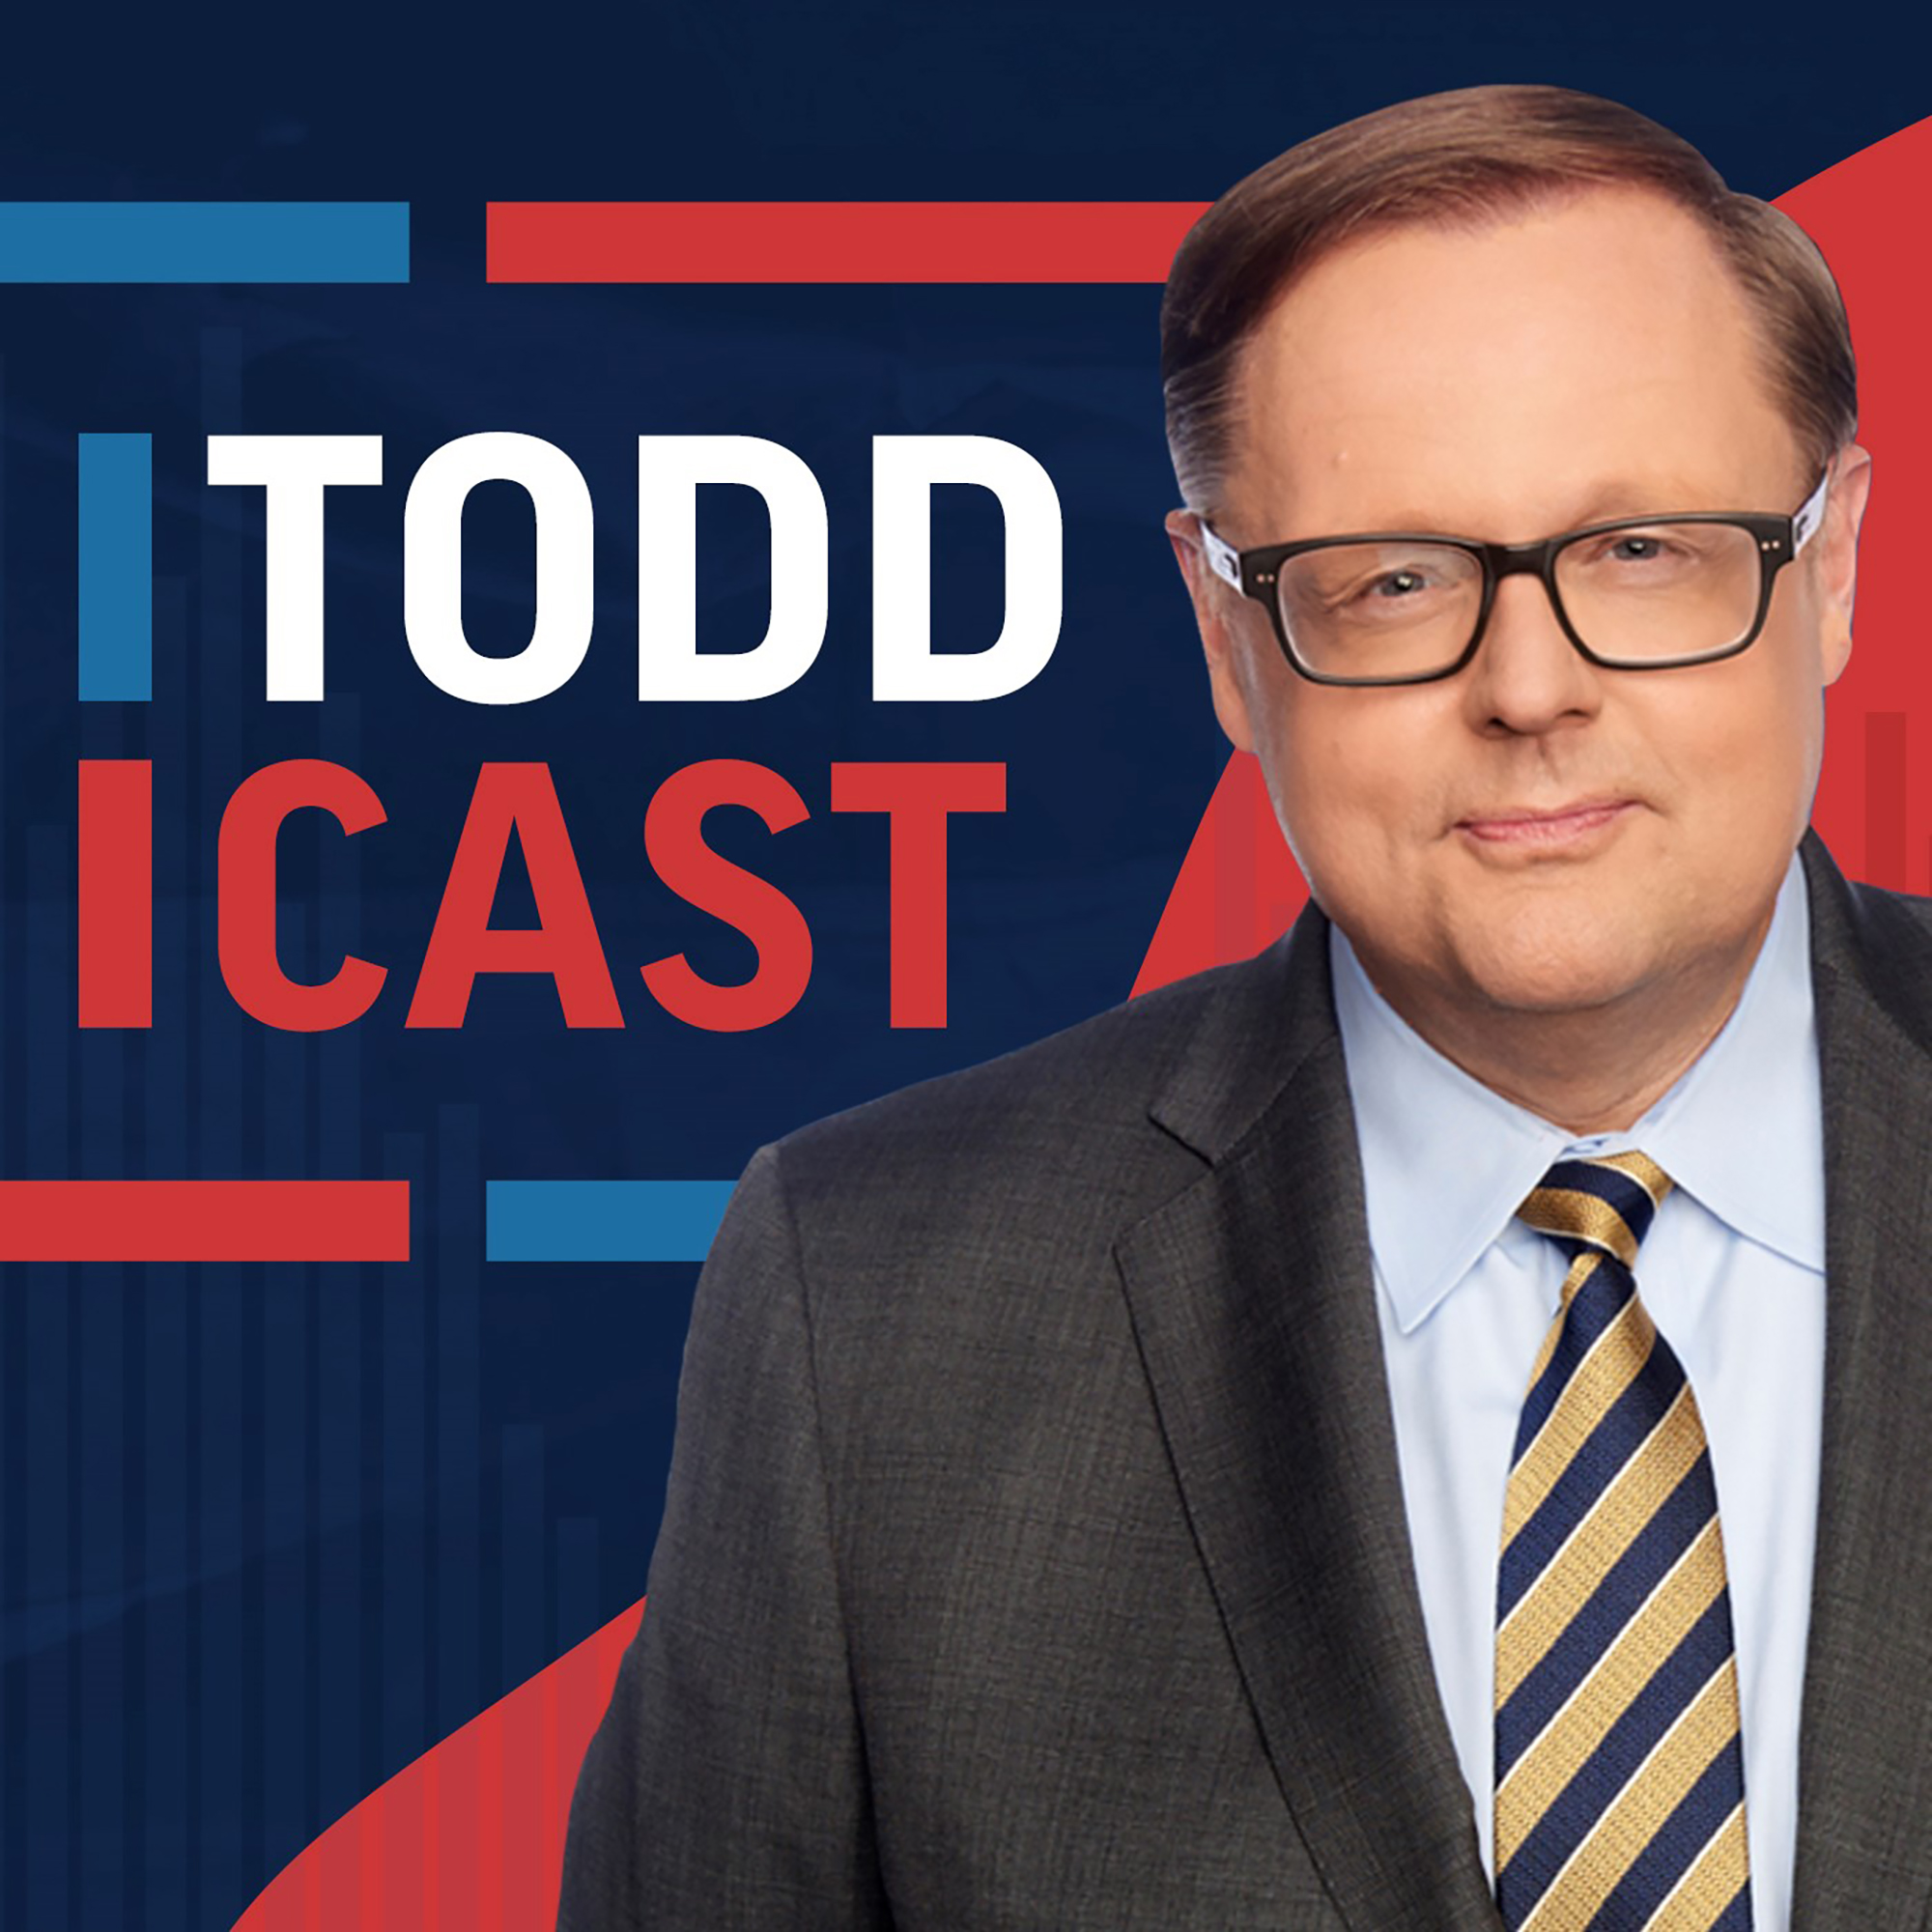 The Todd Starnes Show- We're Not Very Far From Having Armed Government Agents Show Up and Demand That You Get Vaccinated